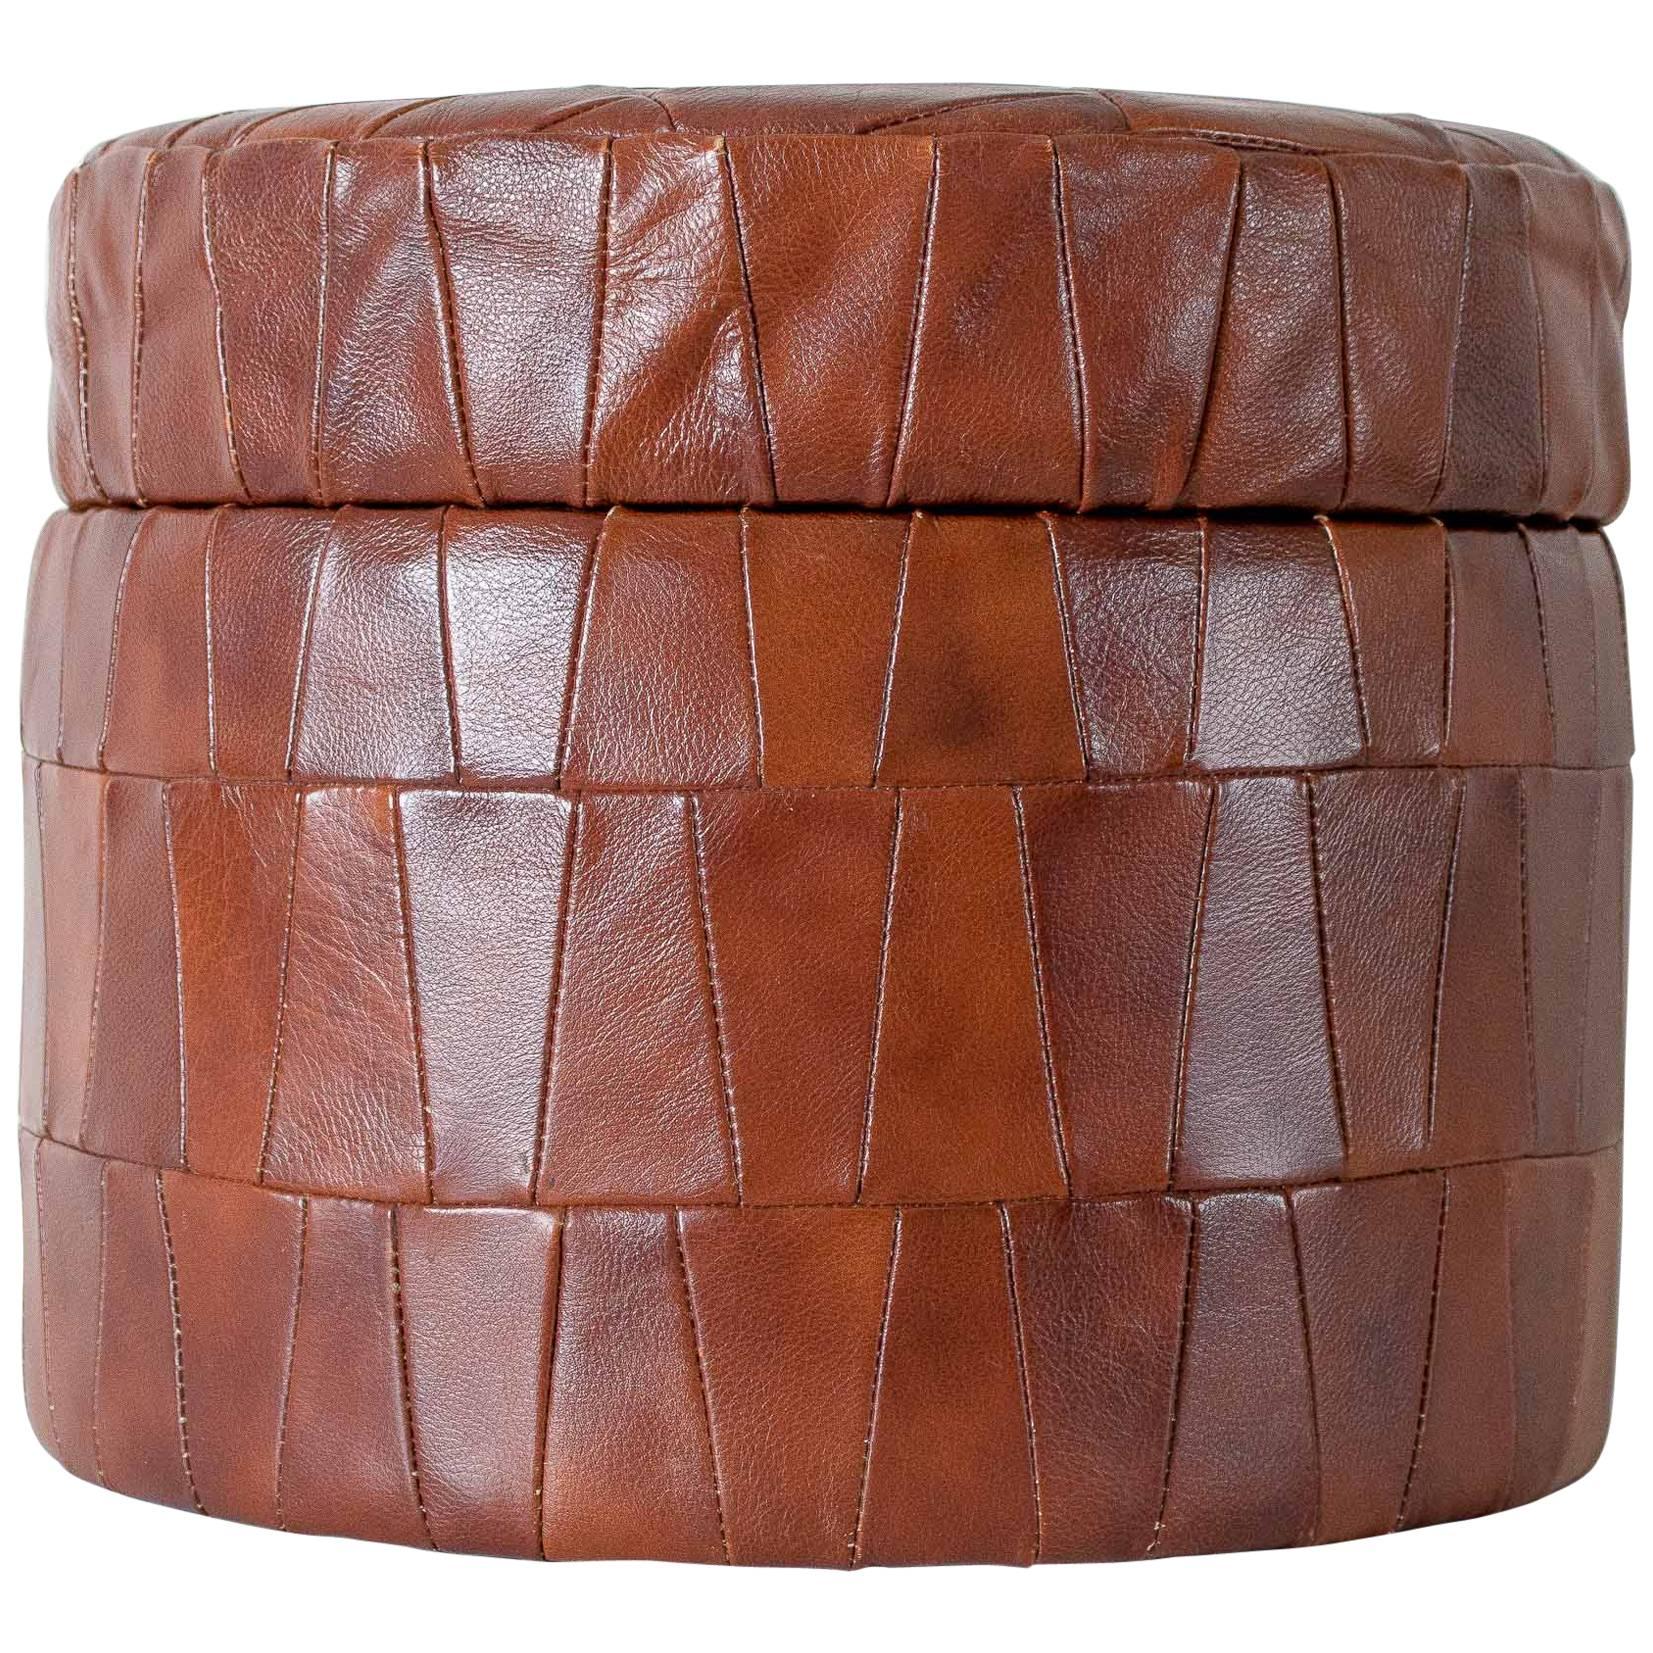 Leather Patchwork Pouf For Sale